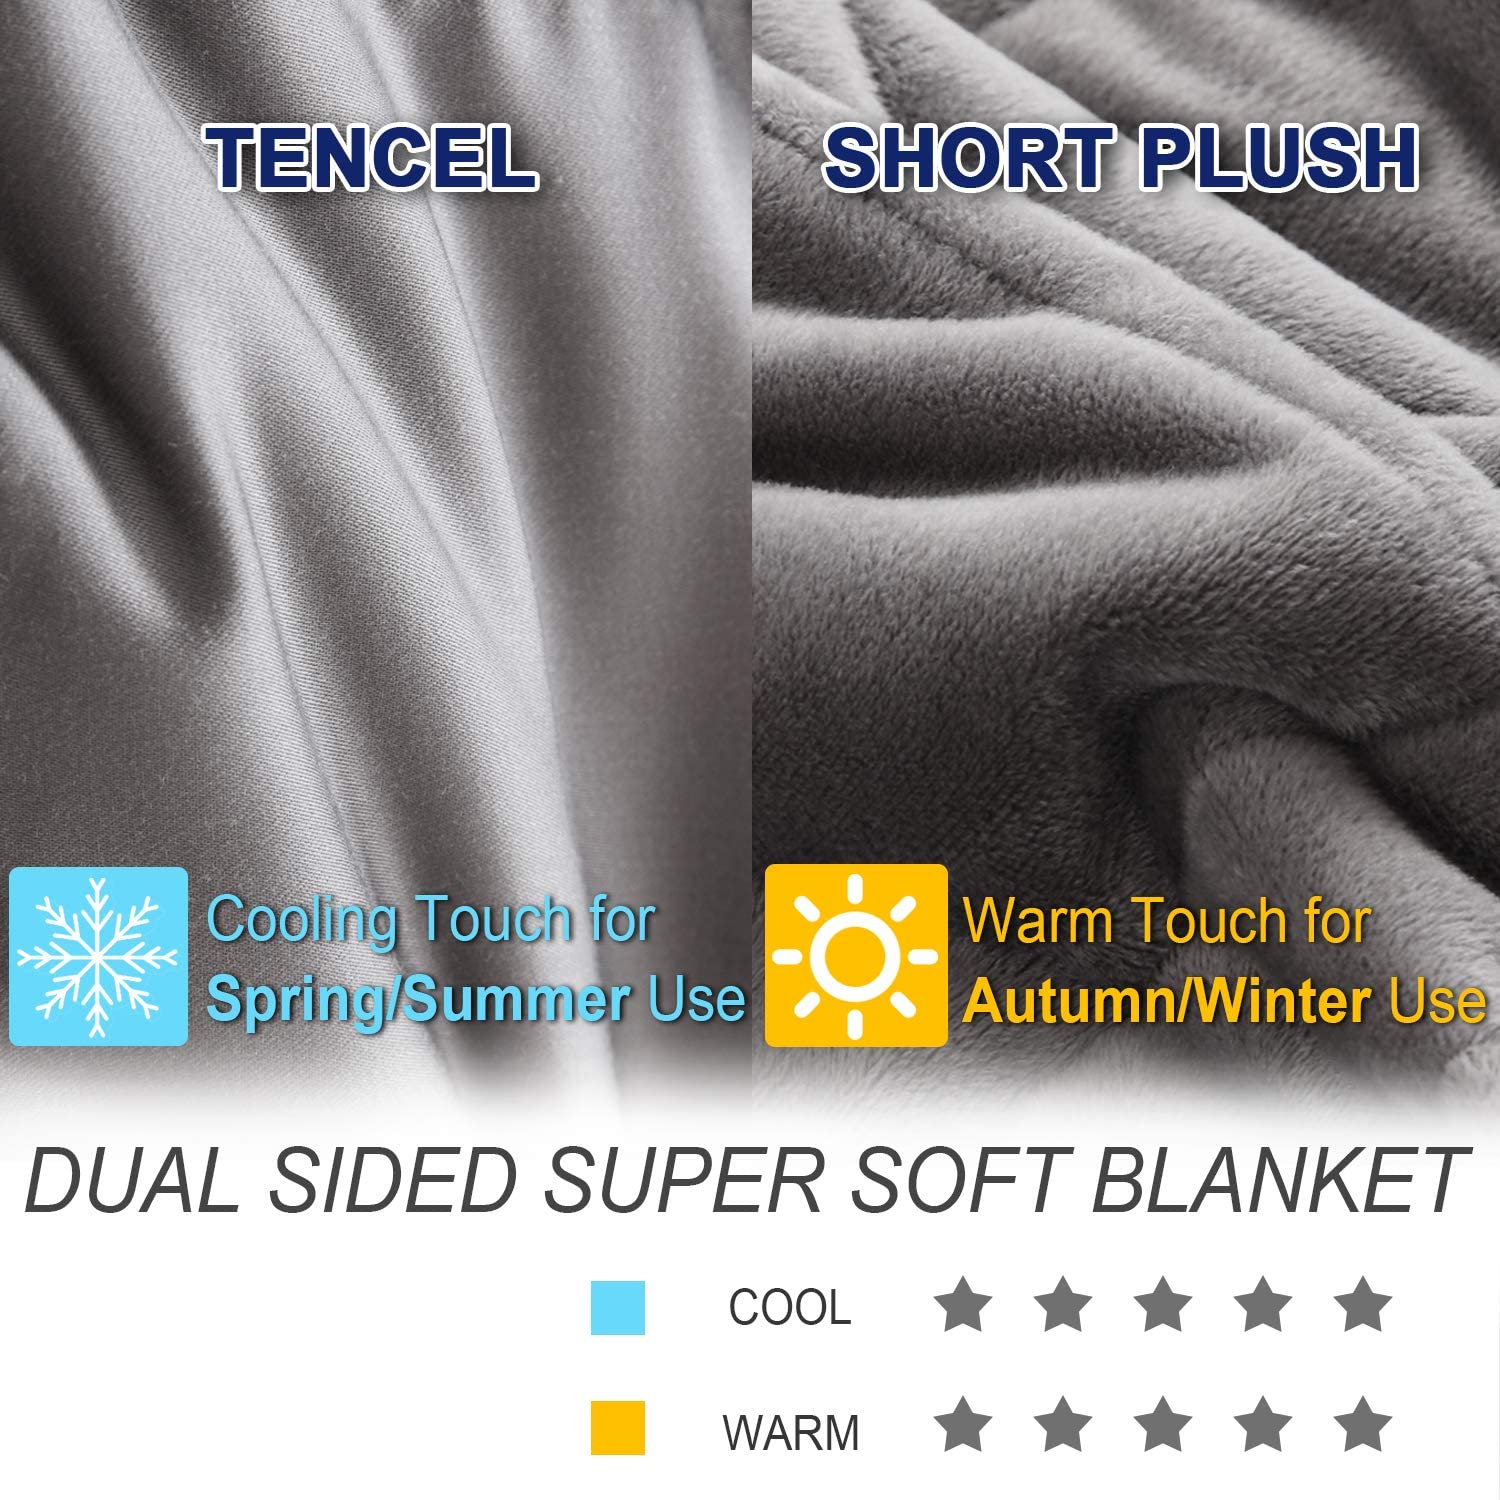 Heated and cooling weighted blanket.